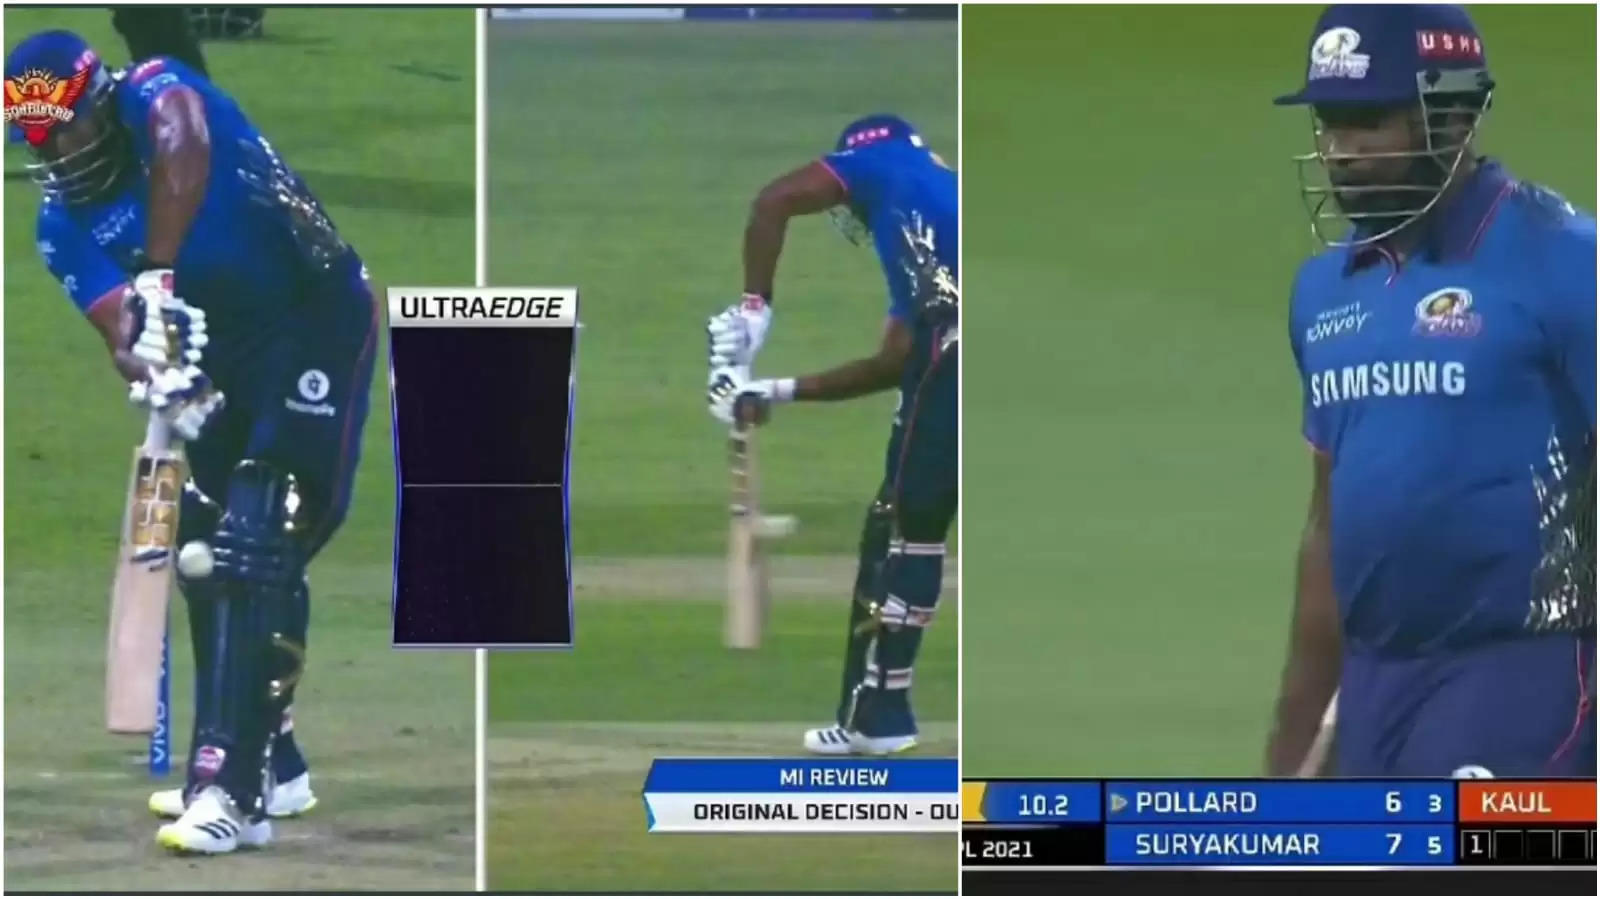 WATCH: Kieron Pollard walks off mid-DRS review assuming he is out; returns after ball tracking shows not out